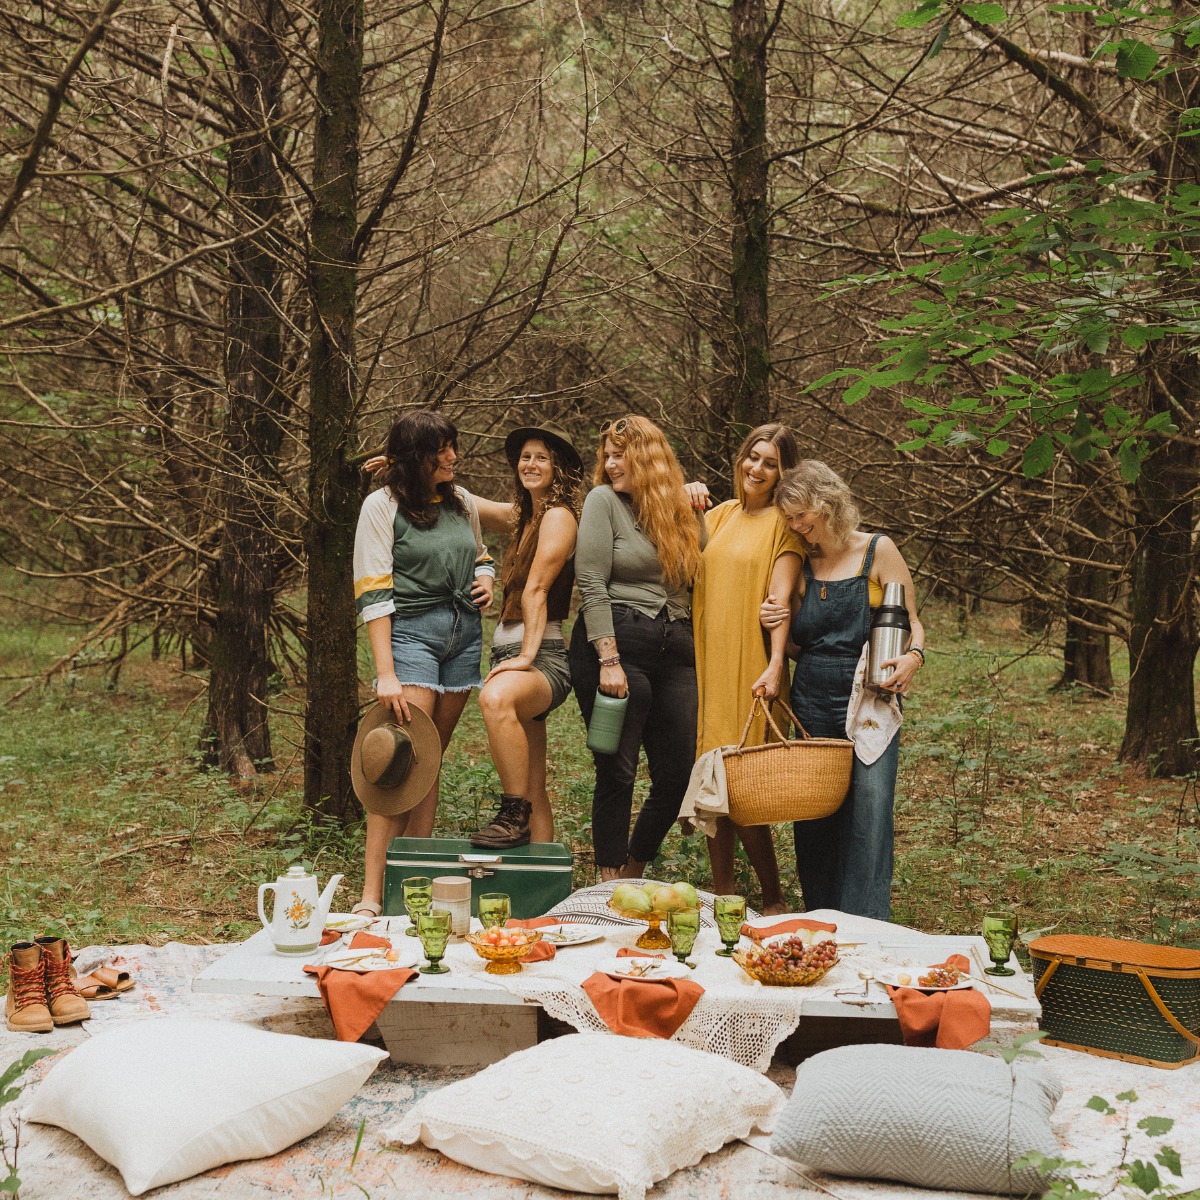 Forget Vegas, The Woods Are The Hot New Bachelorette Destination